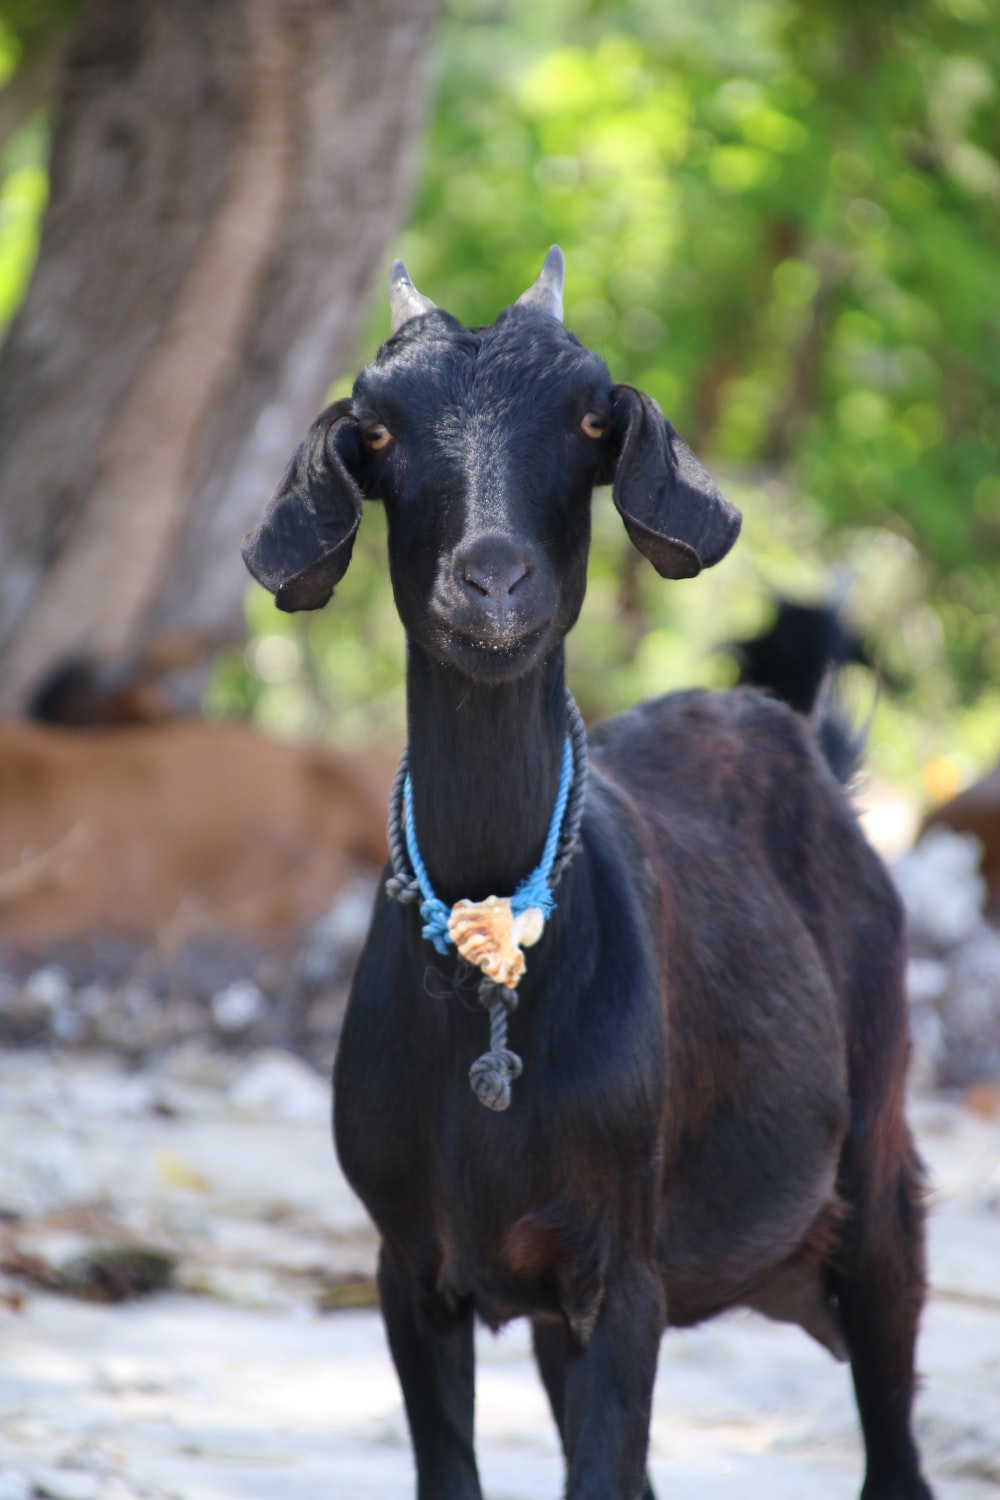 Funny Goat Picture. Download Free Image